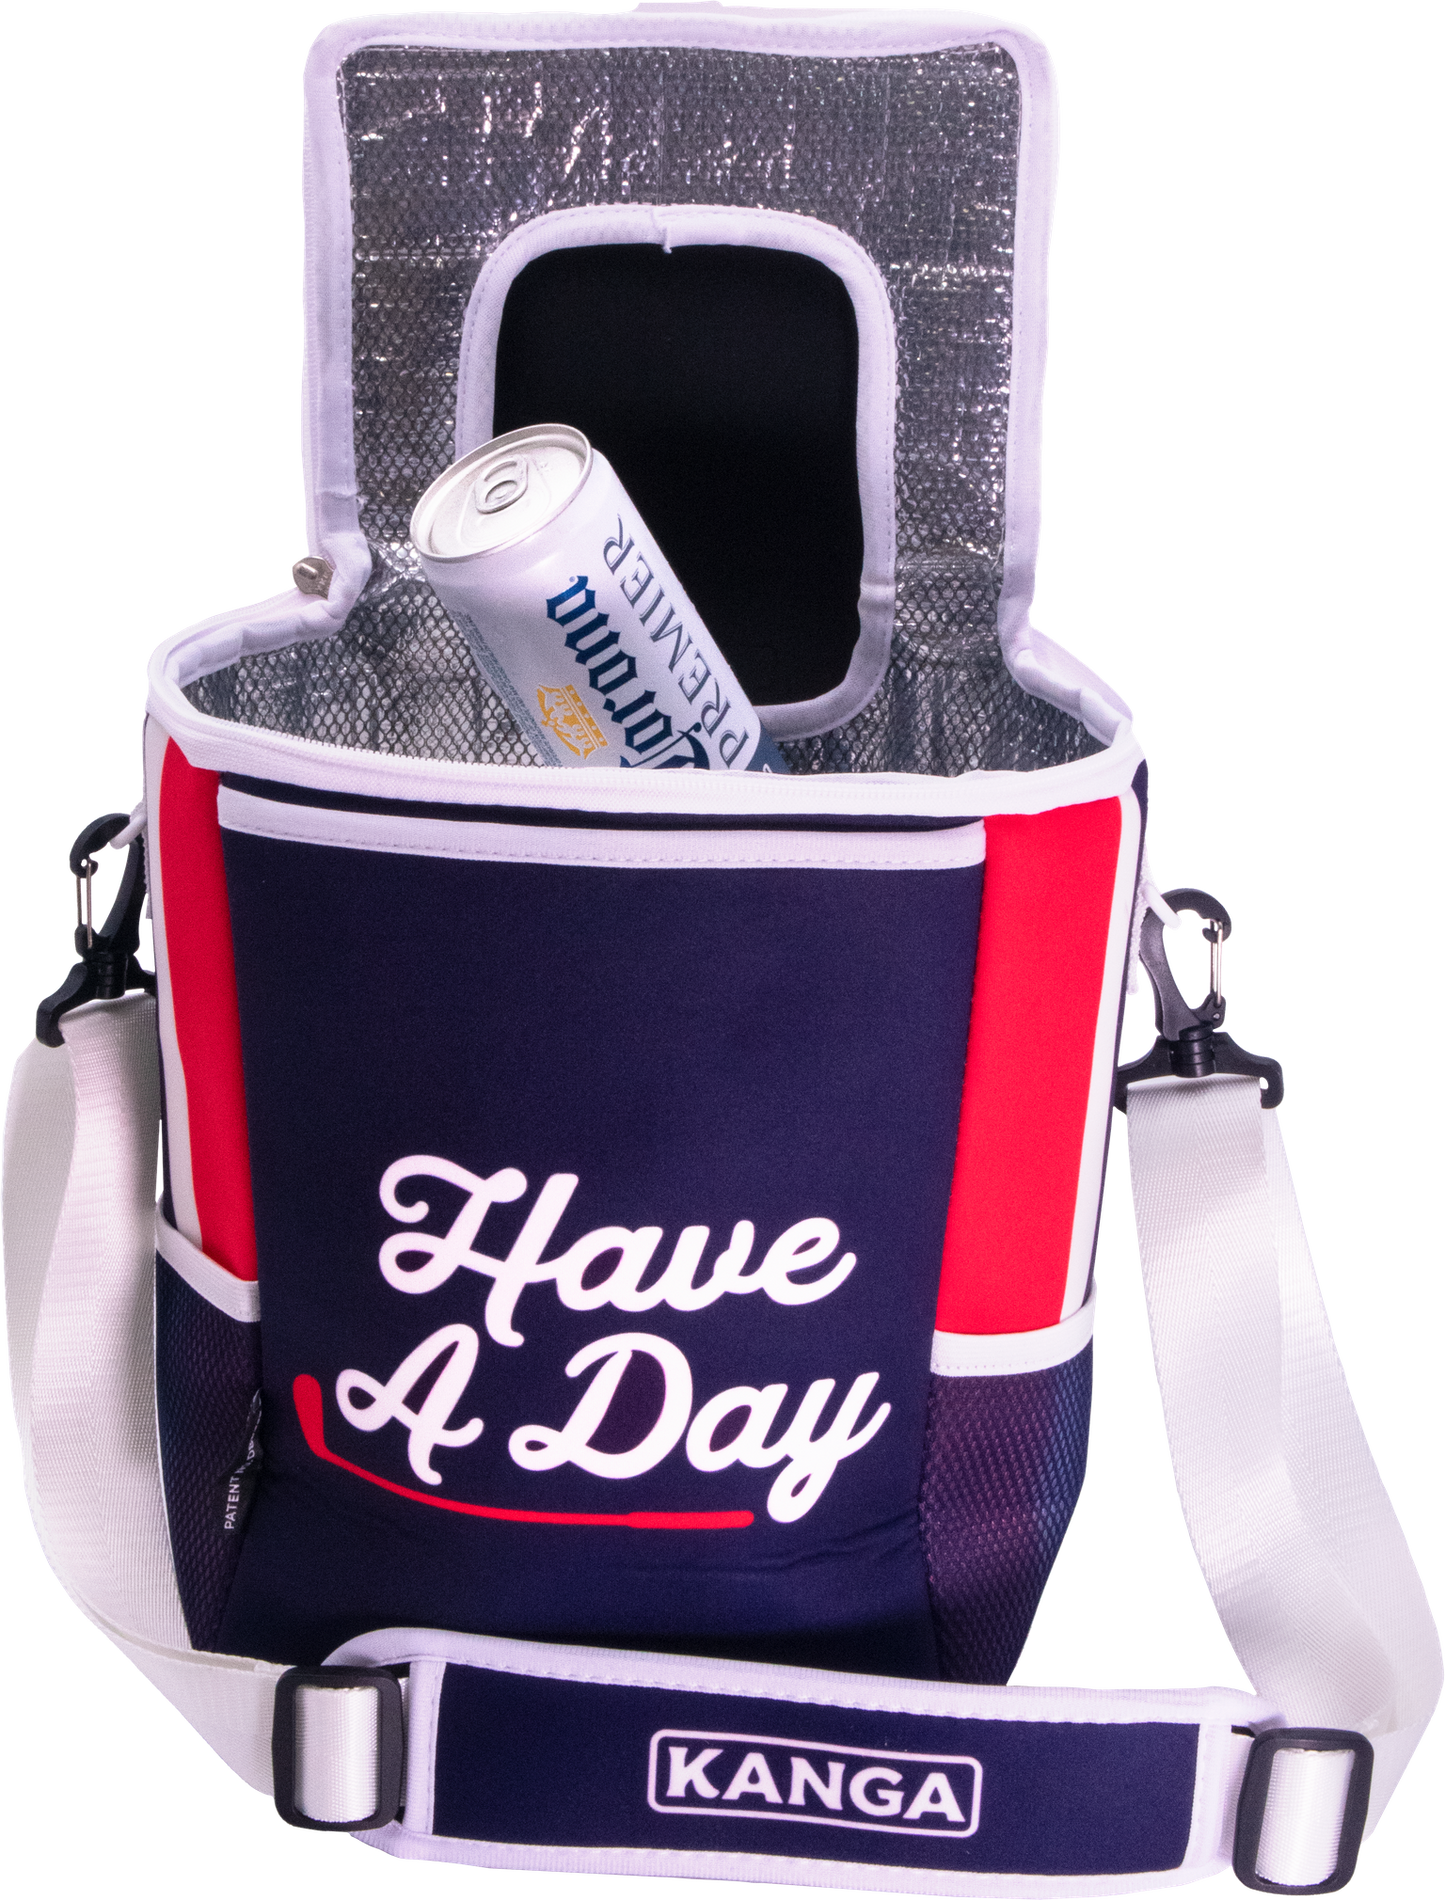 Have A Day Kanga Pouch Cooler